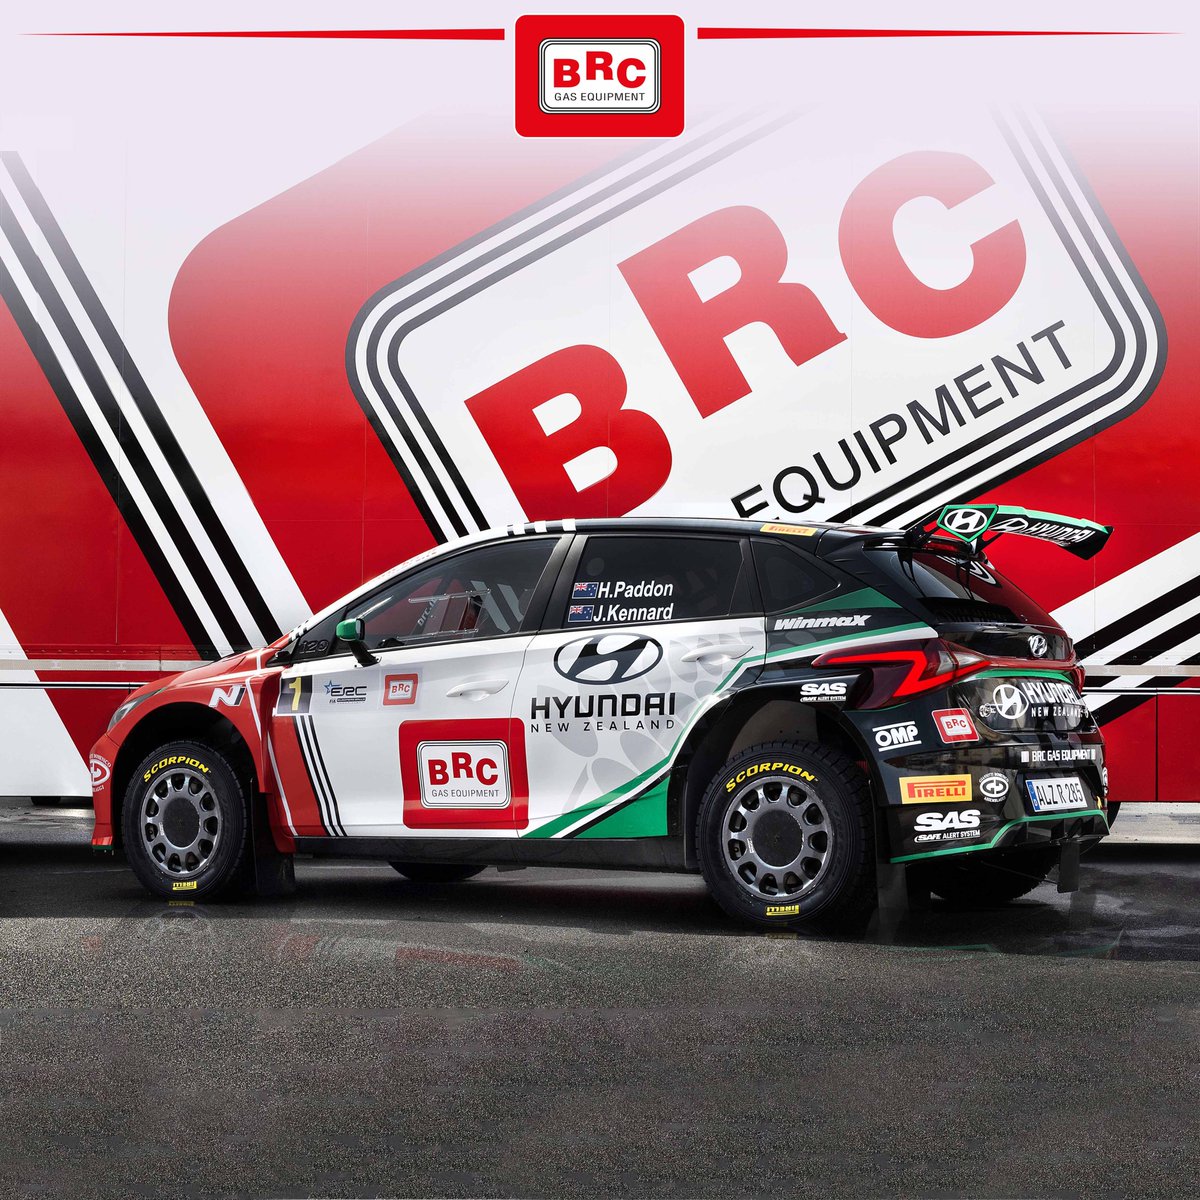 BRC Racing Team and Paddon preparing for Challenging Rally Hungary. 'I'm looking forward to getting the new season underway, and obviously Rally Hungary is a brand-new rally for us,' , setting the stage for his return to competition after a 5 month off-season. '